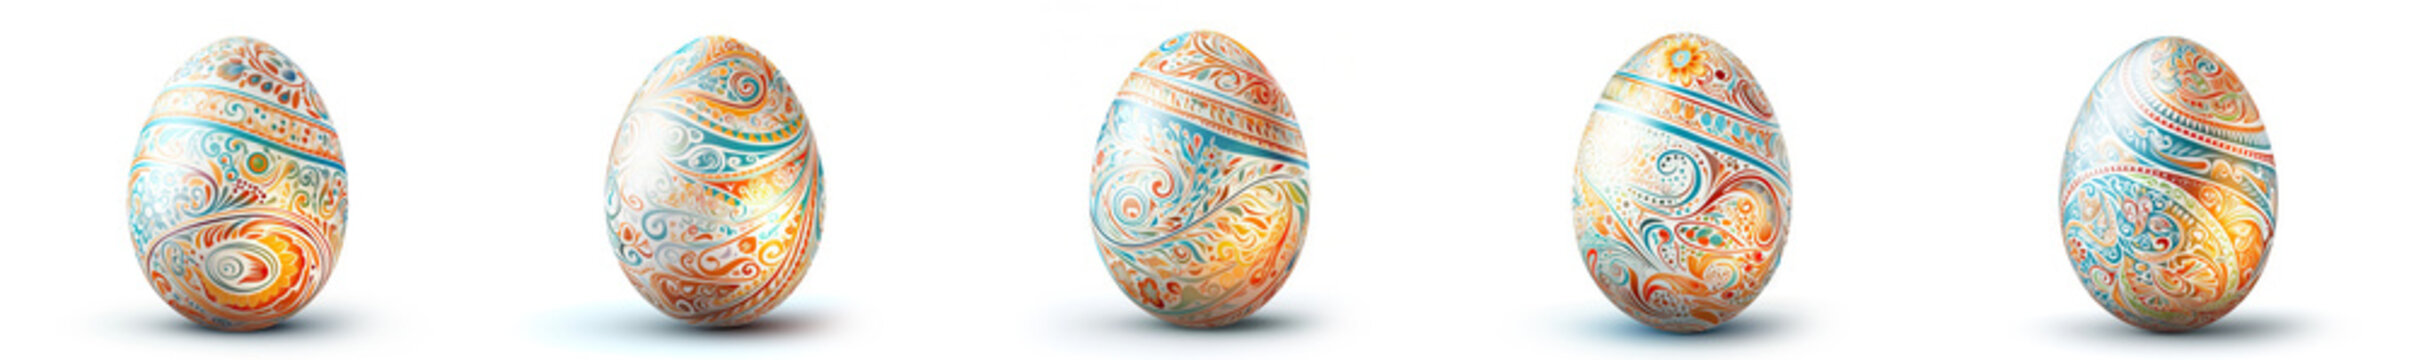 Colorfully decorated Easter eggs with patterns displayed and folk patterns in red, yellow and blue colors, isolate on a white background